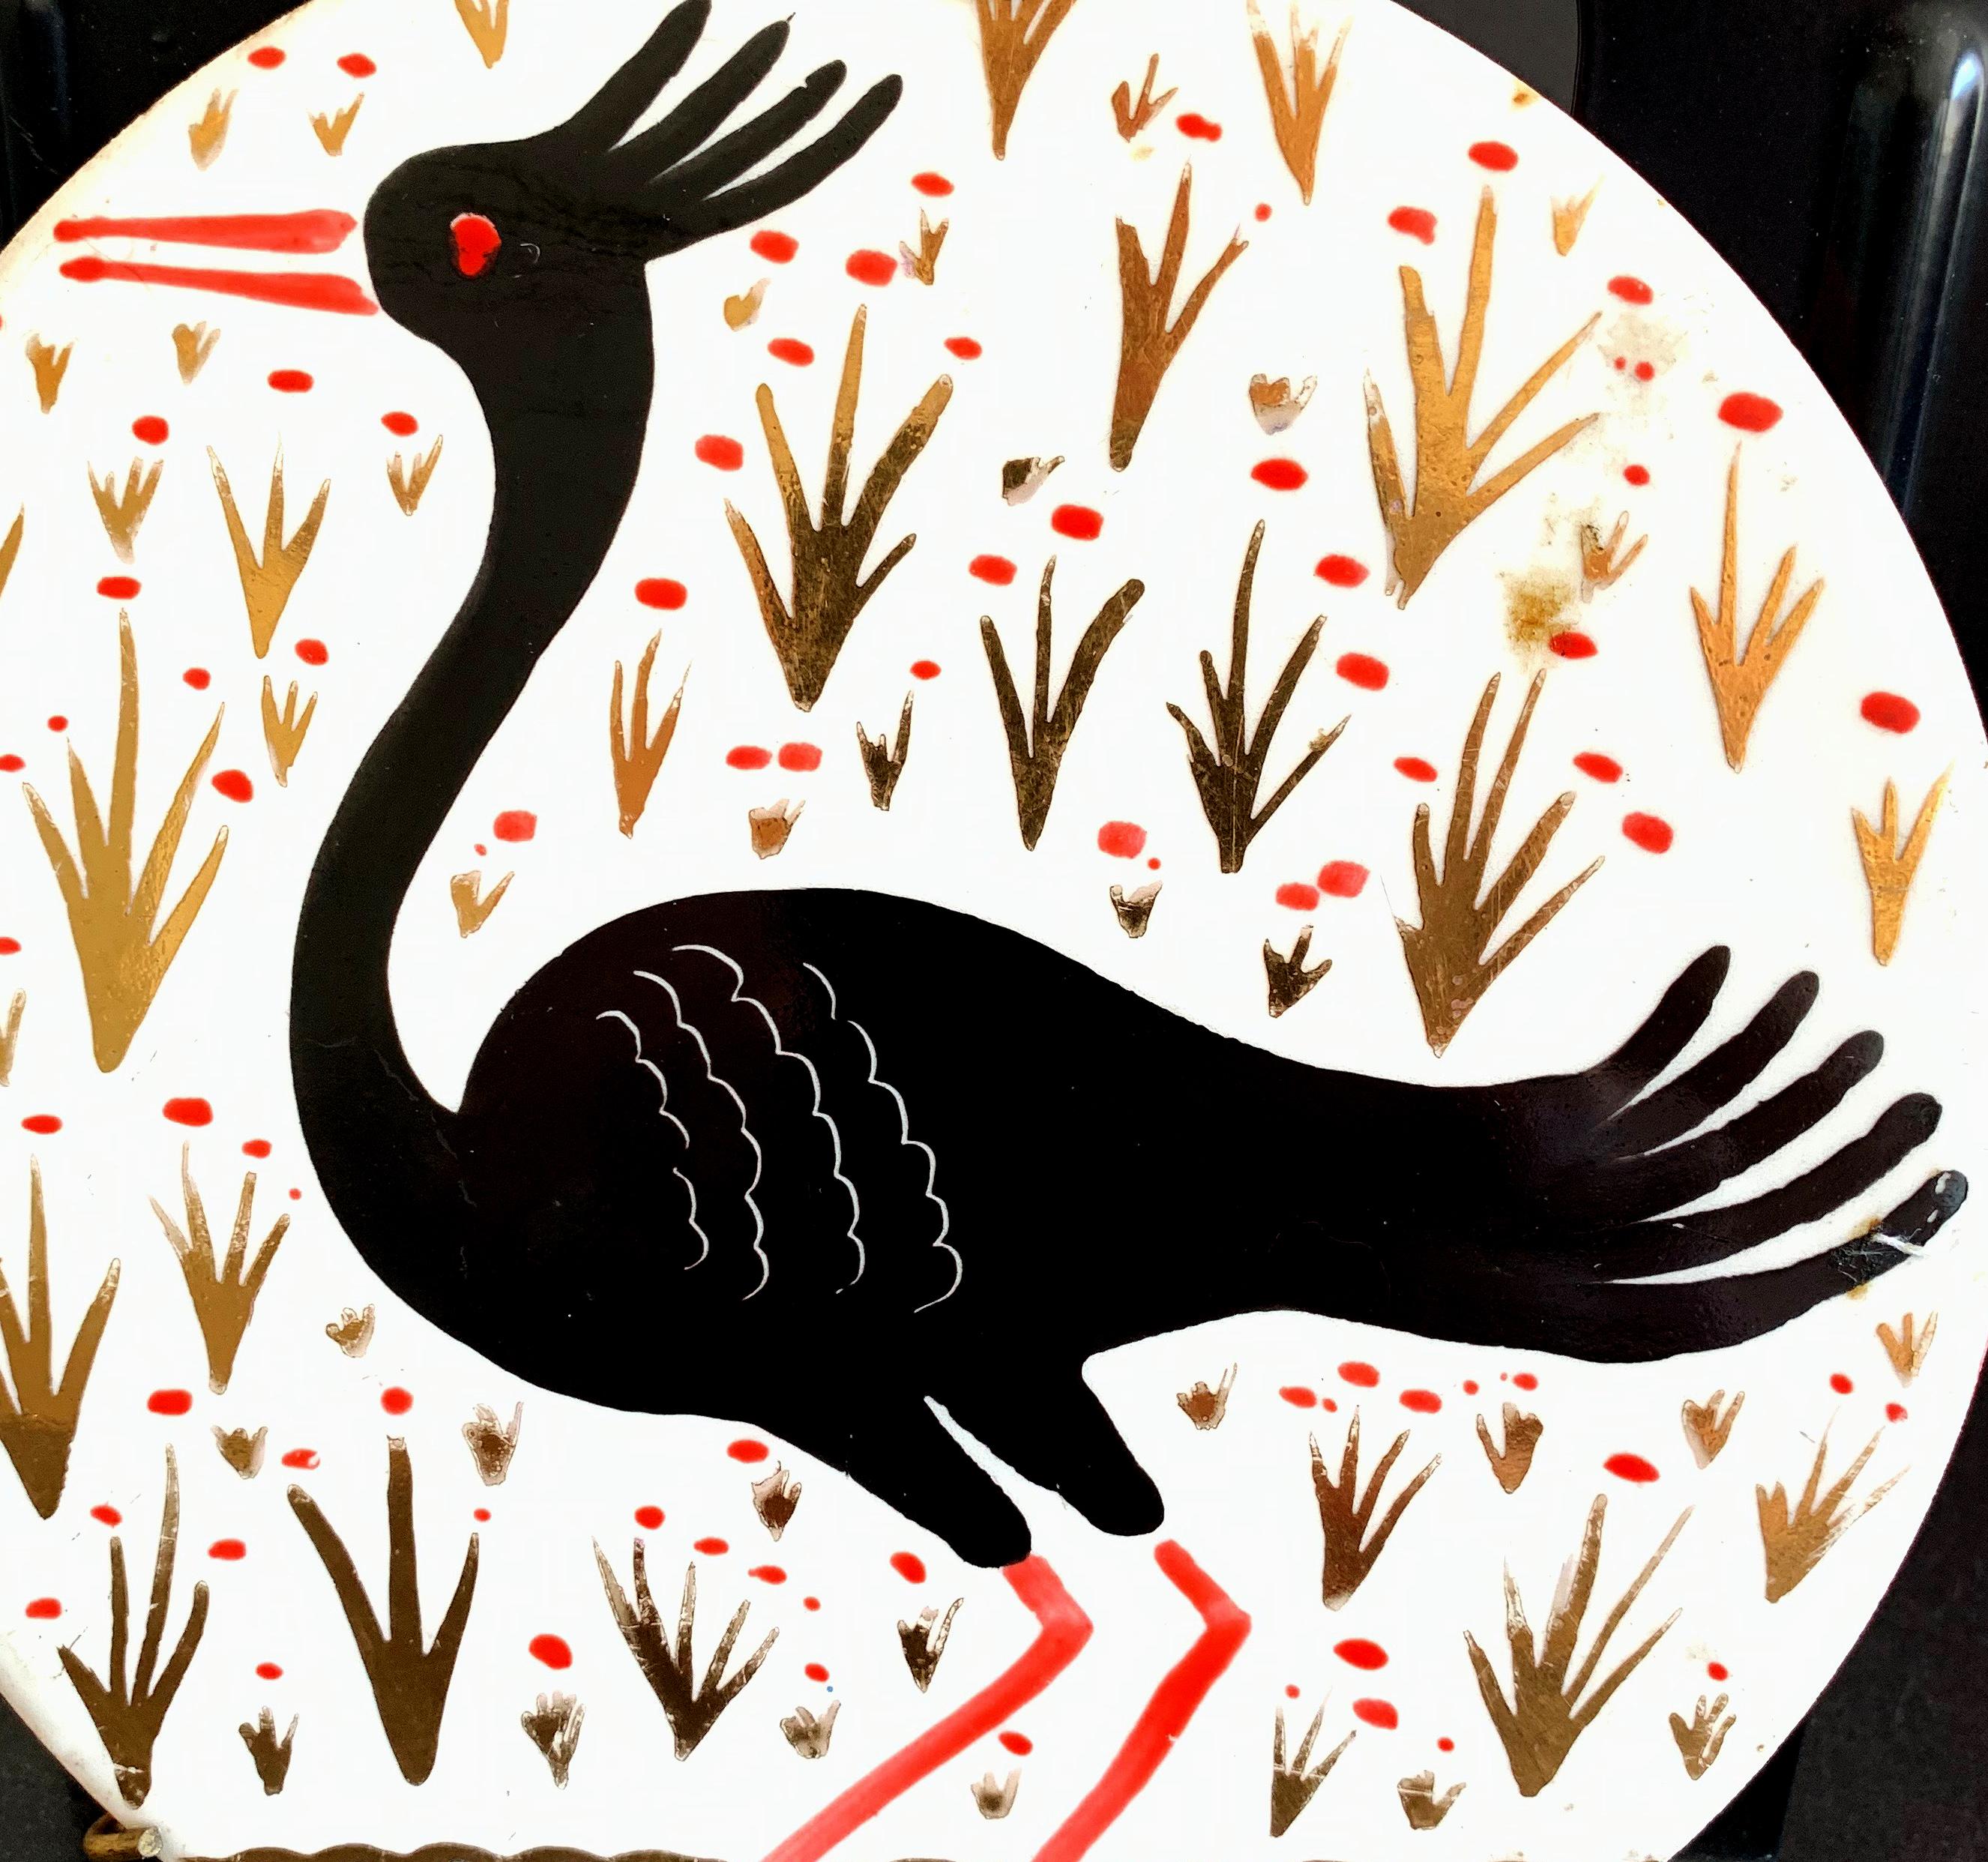 Rare and winning, this lovely Art Deco porcelain rondel, glazed in black, gold and red on a white ground, was designed and executed by Waylande Gregory, the great American sculptor and ceramicist. The crested water bird depicted is exotic and full